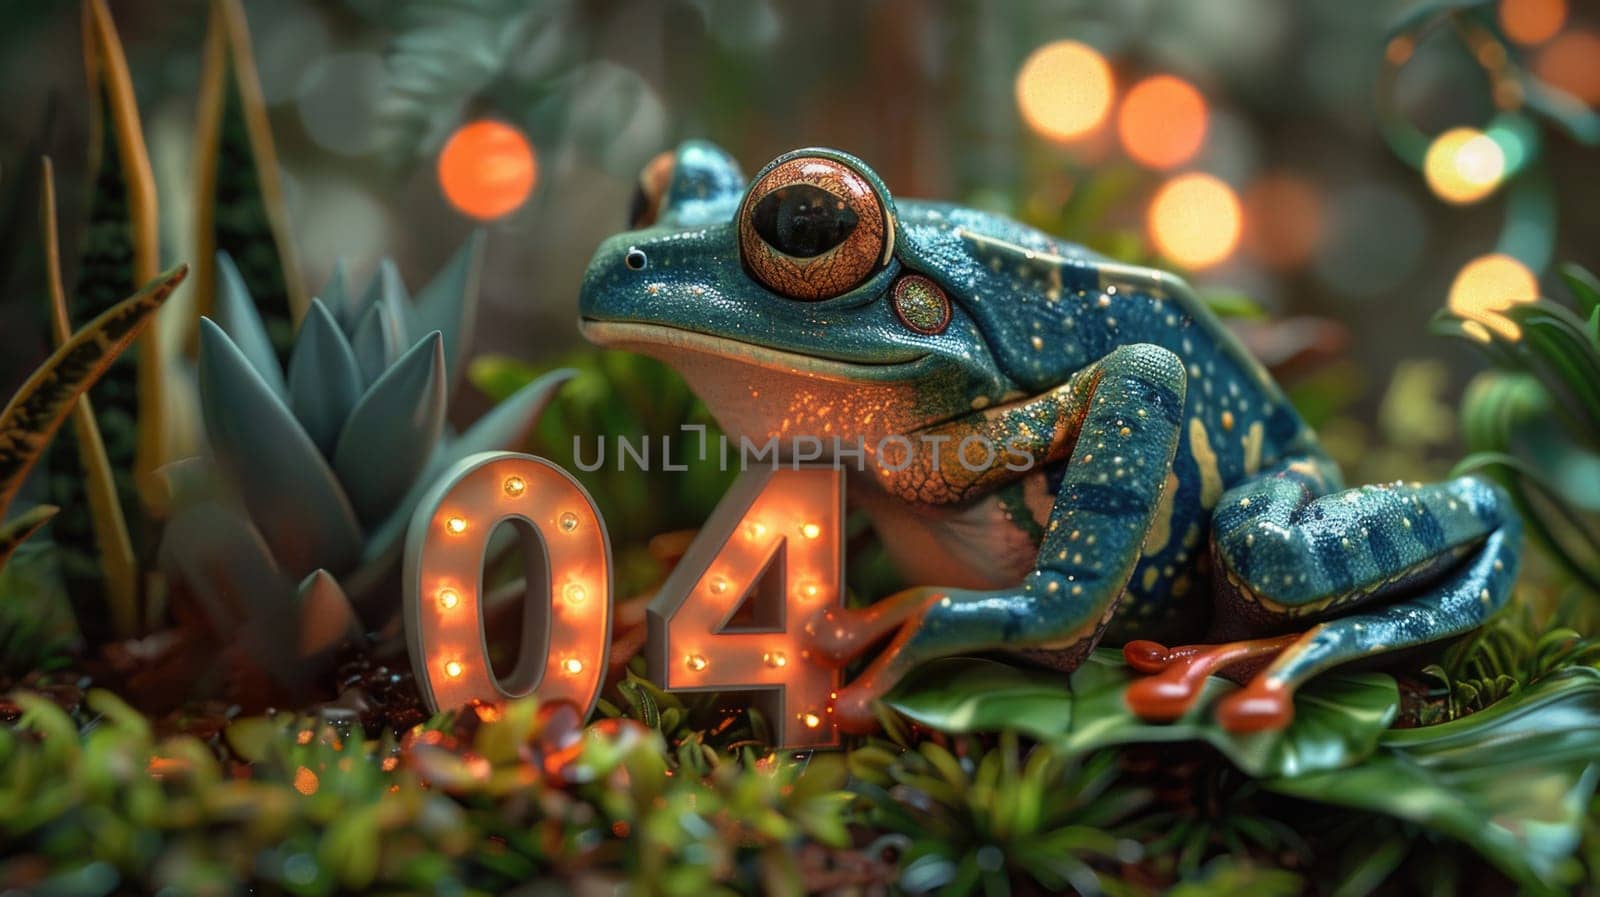 A blue frog sits on top of a number forty, showcasing an intriguing combination of colors and objects.